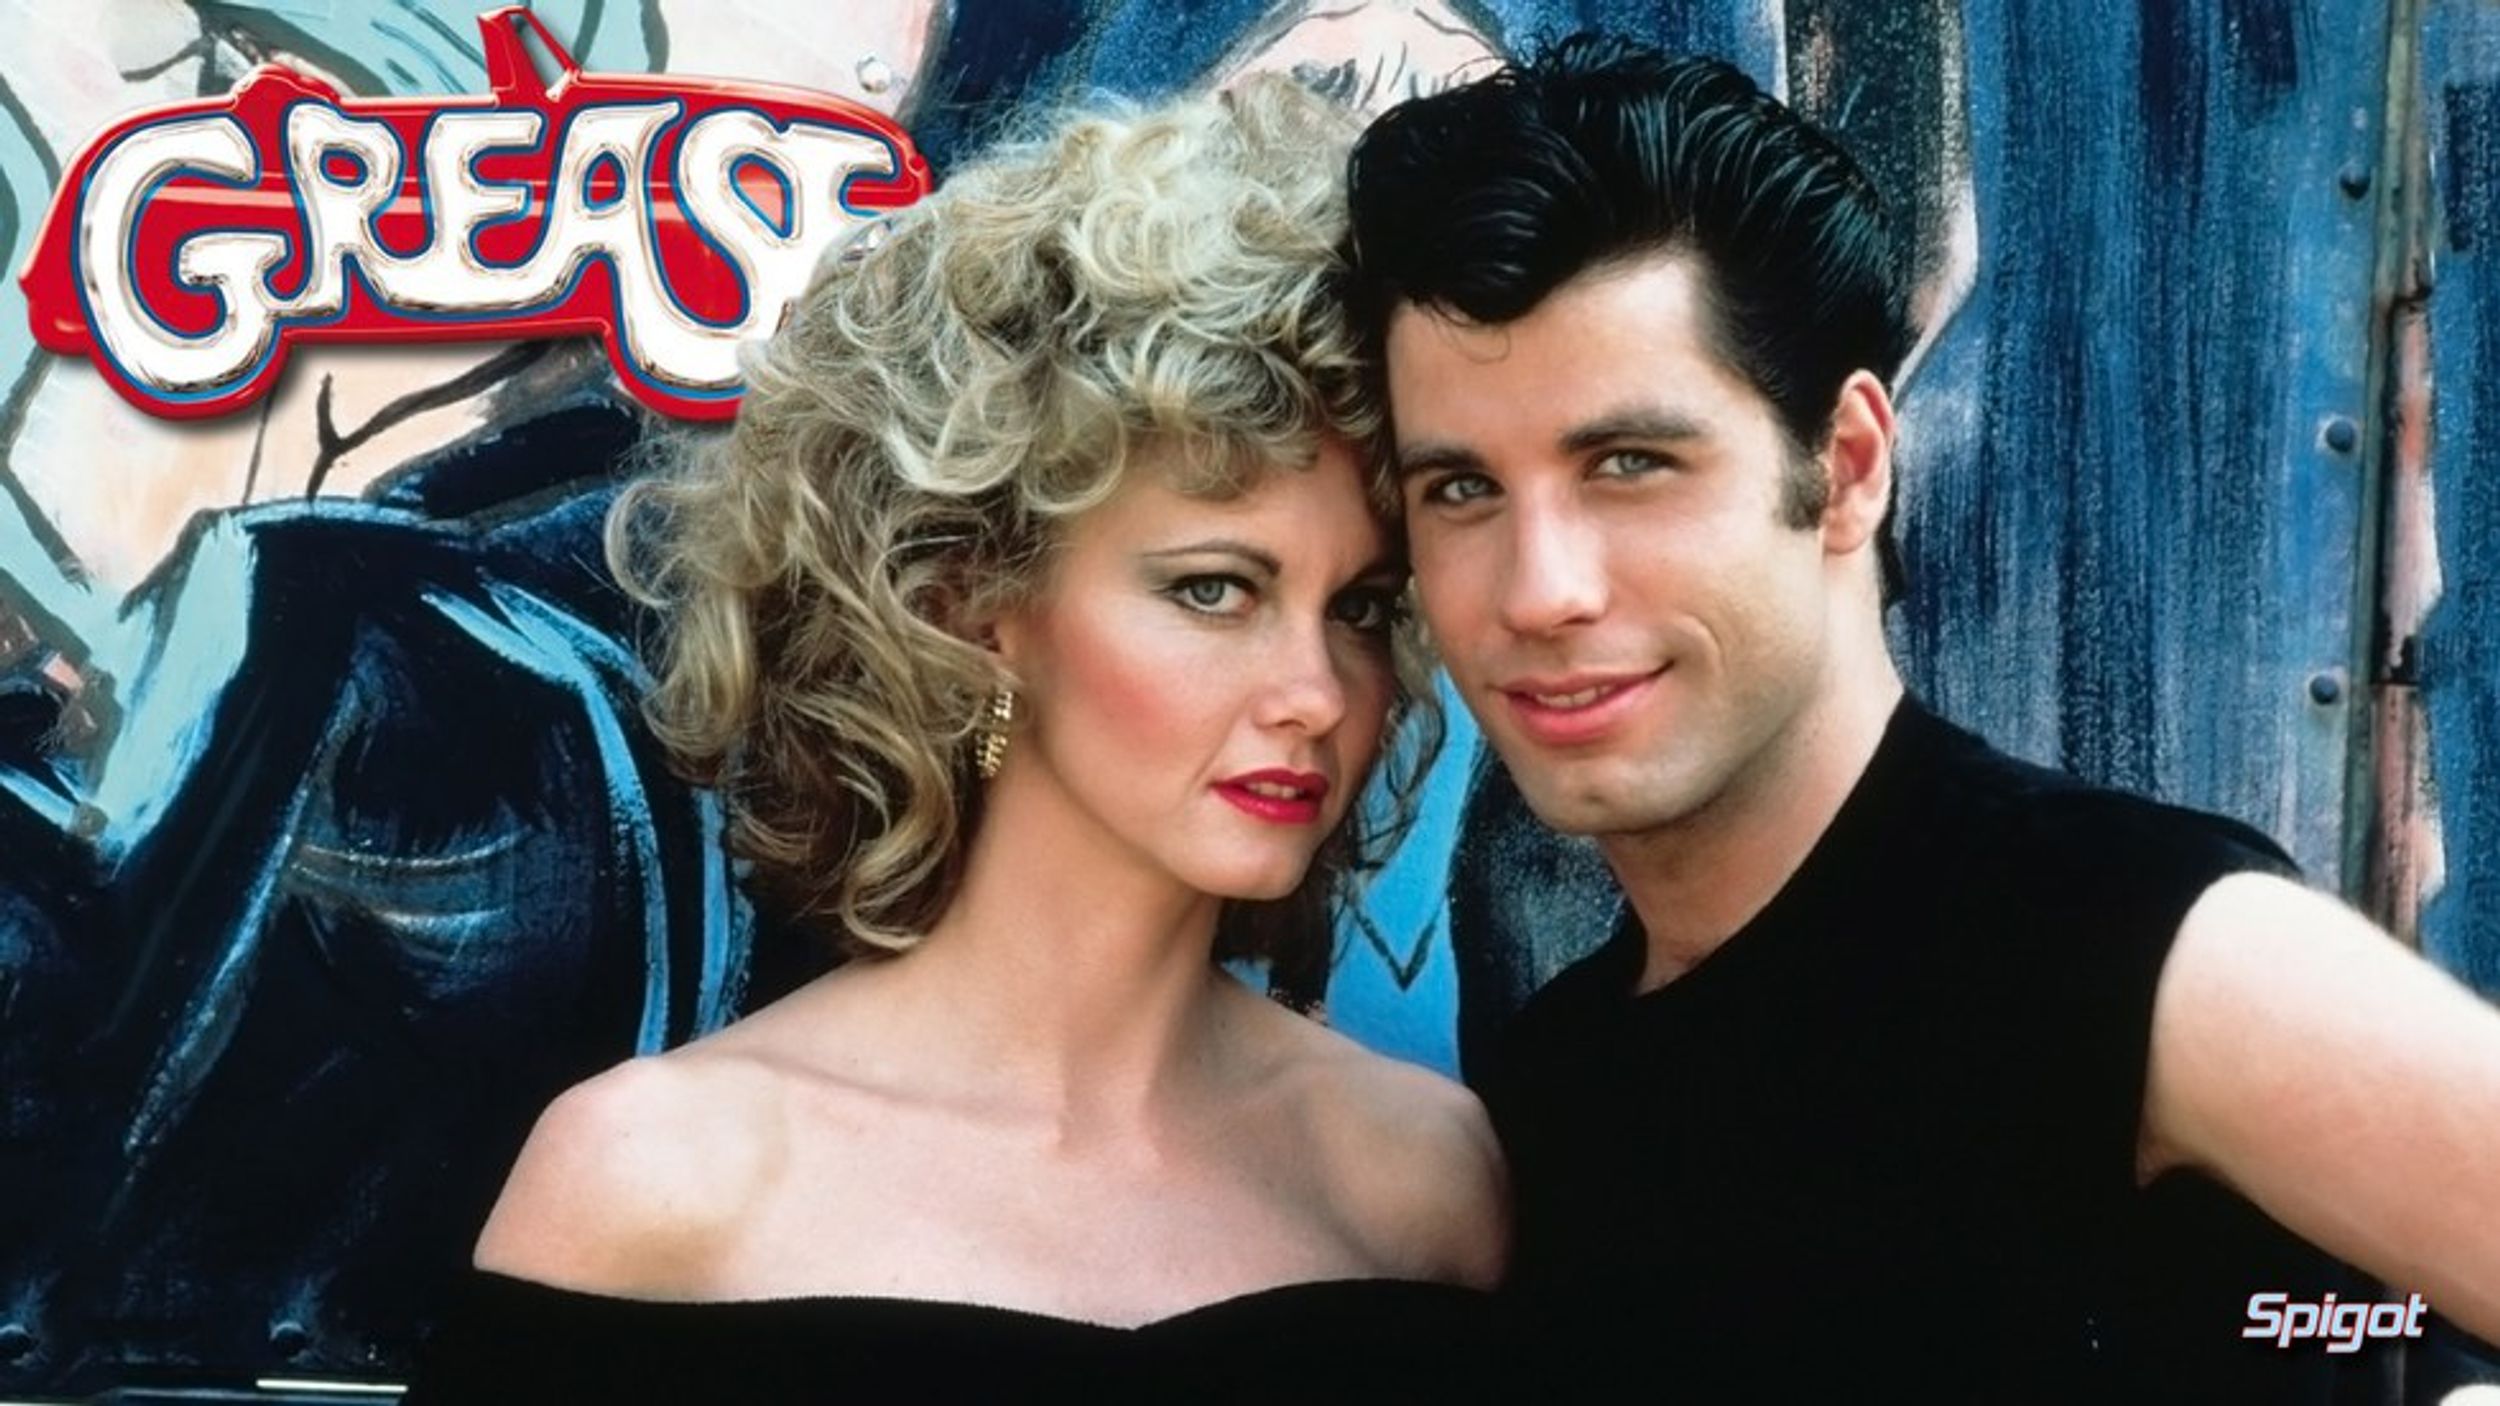 10 1/2 Life Lessons You Can Learn From 'Grease'